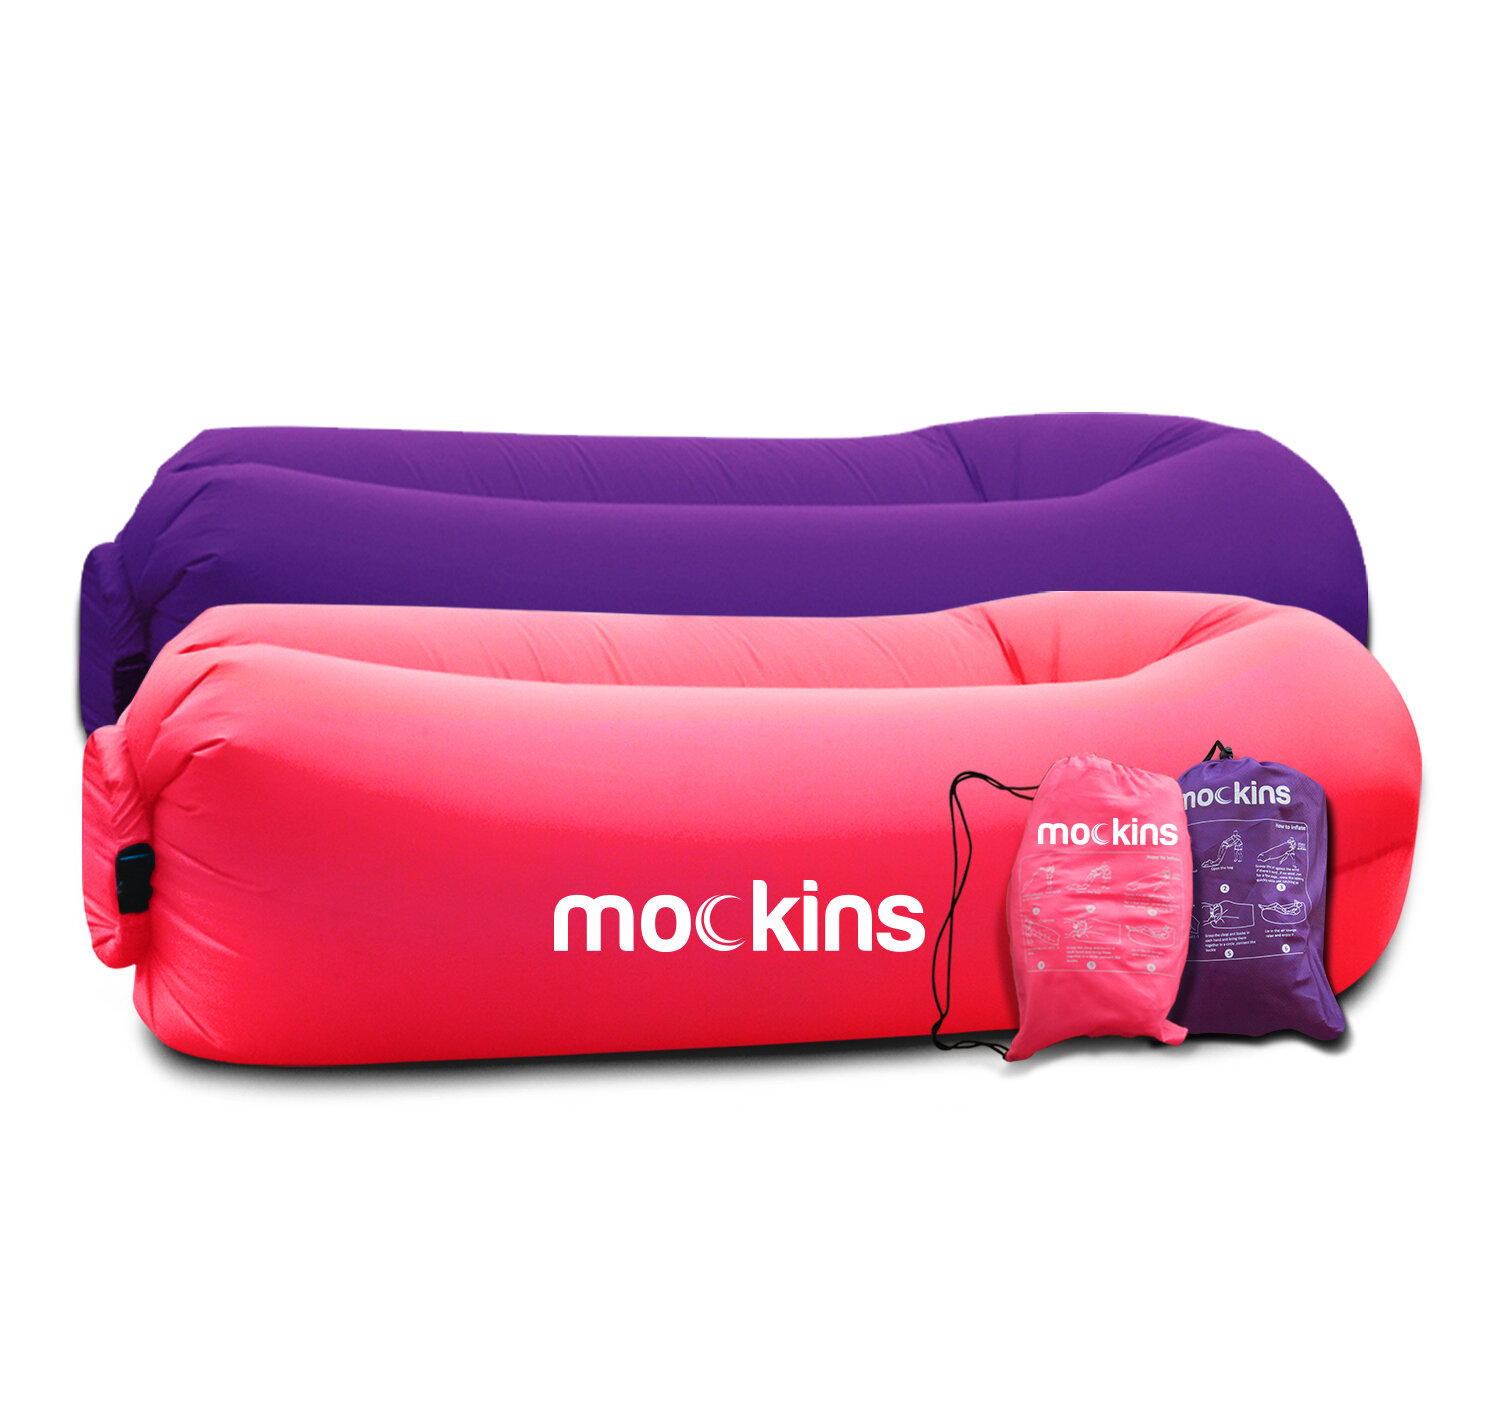 Details about   Mockins Inflatable Red Blow Up Lounger Beach Chair Sofa With Travel Bag Pockets 